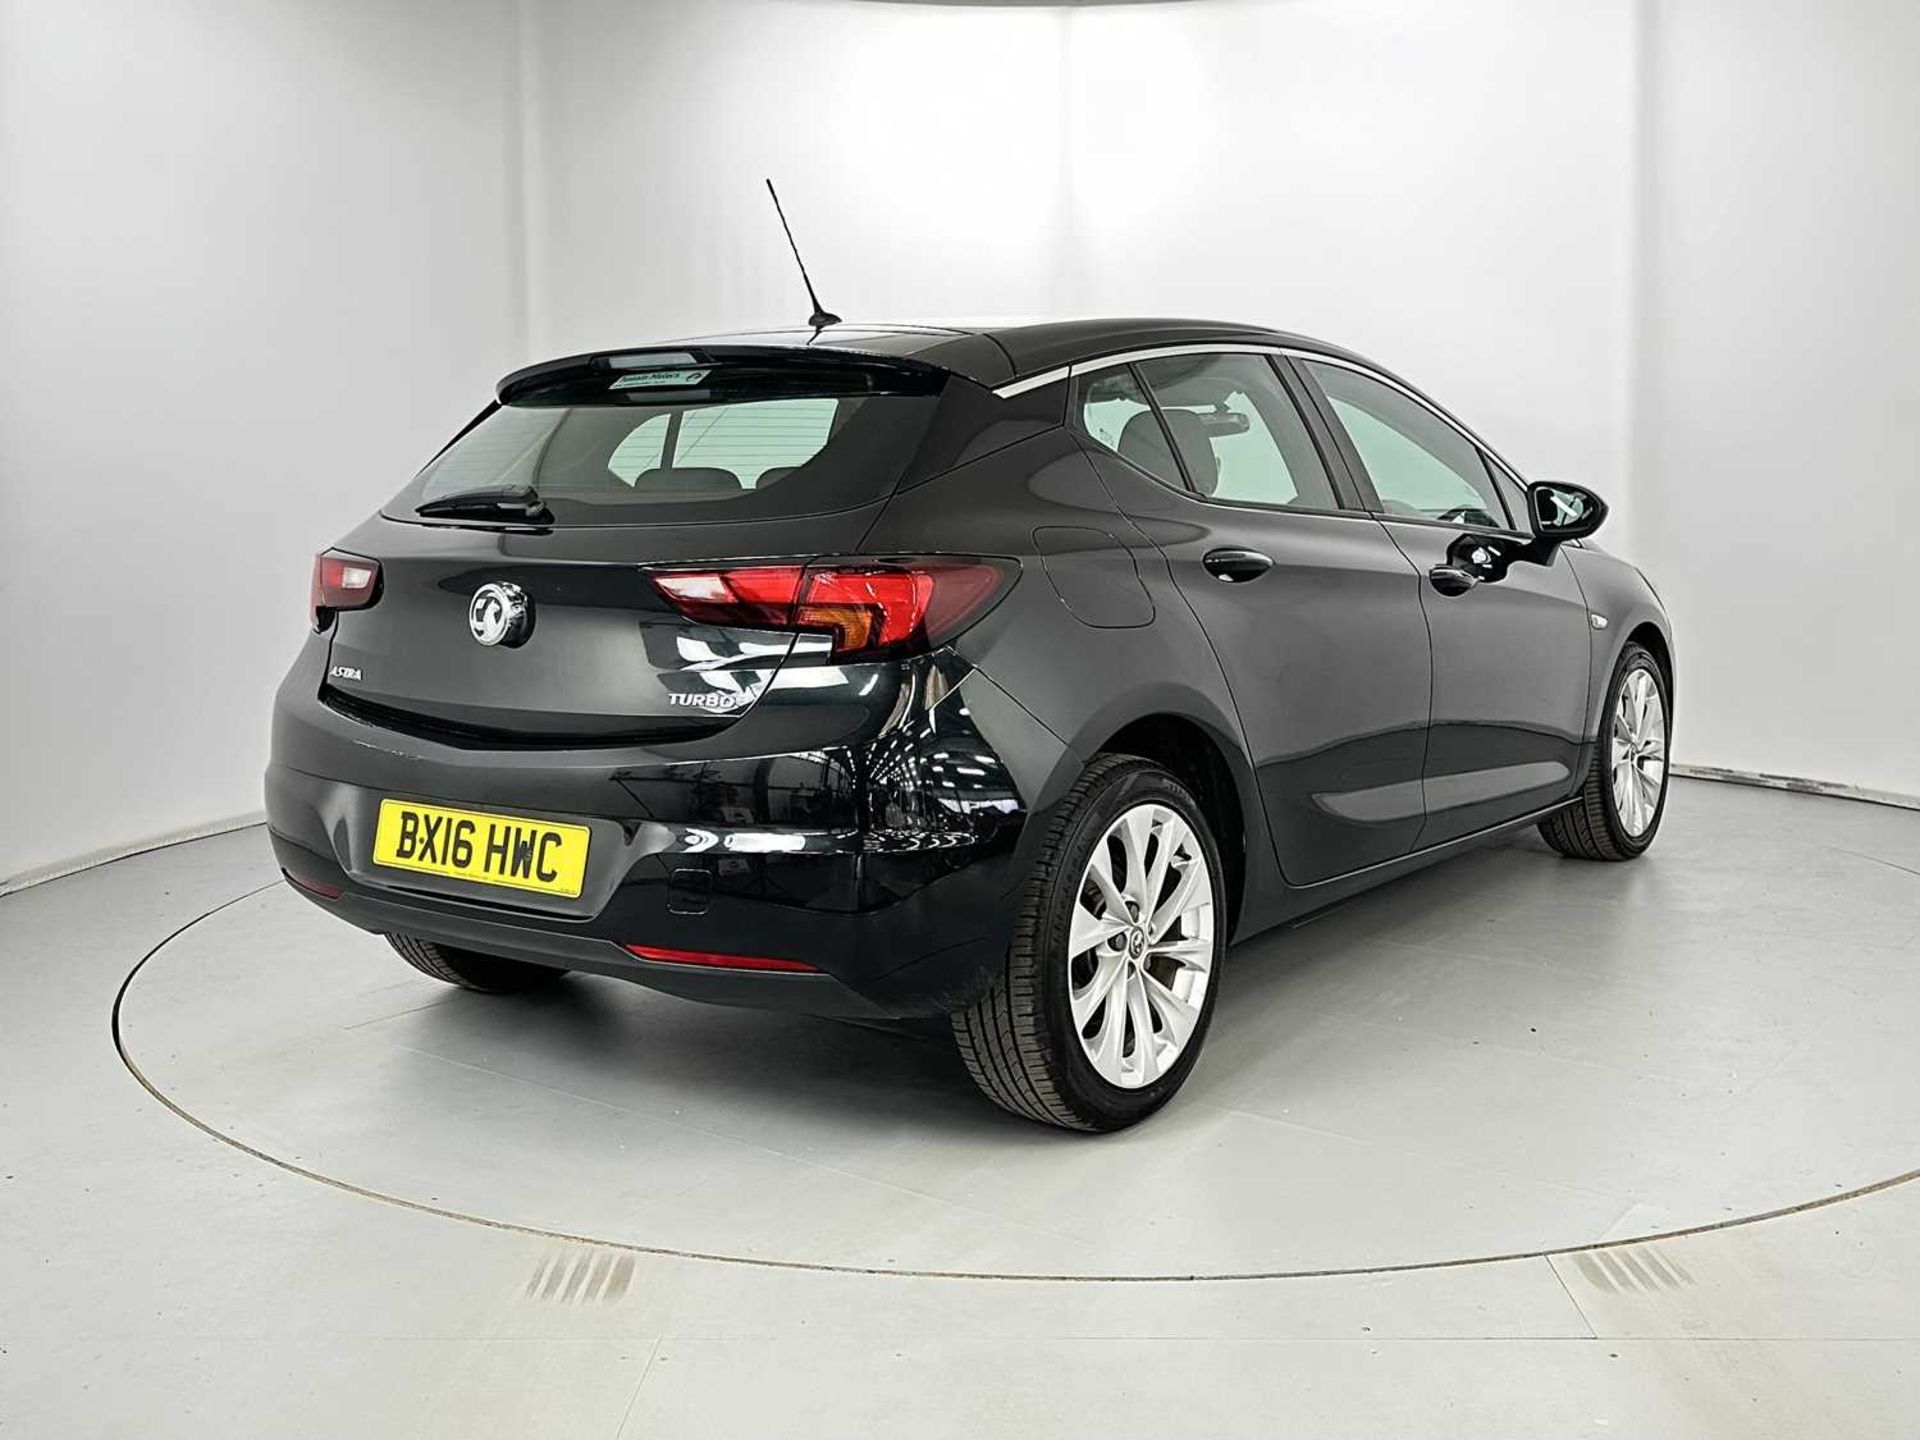 2016 Vauxhall Astra - Image 9 of 34